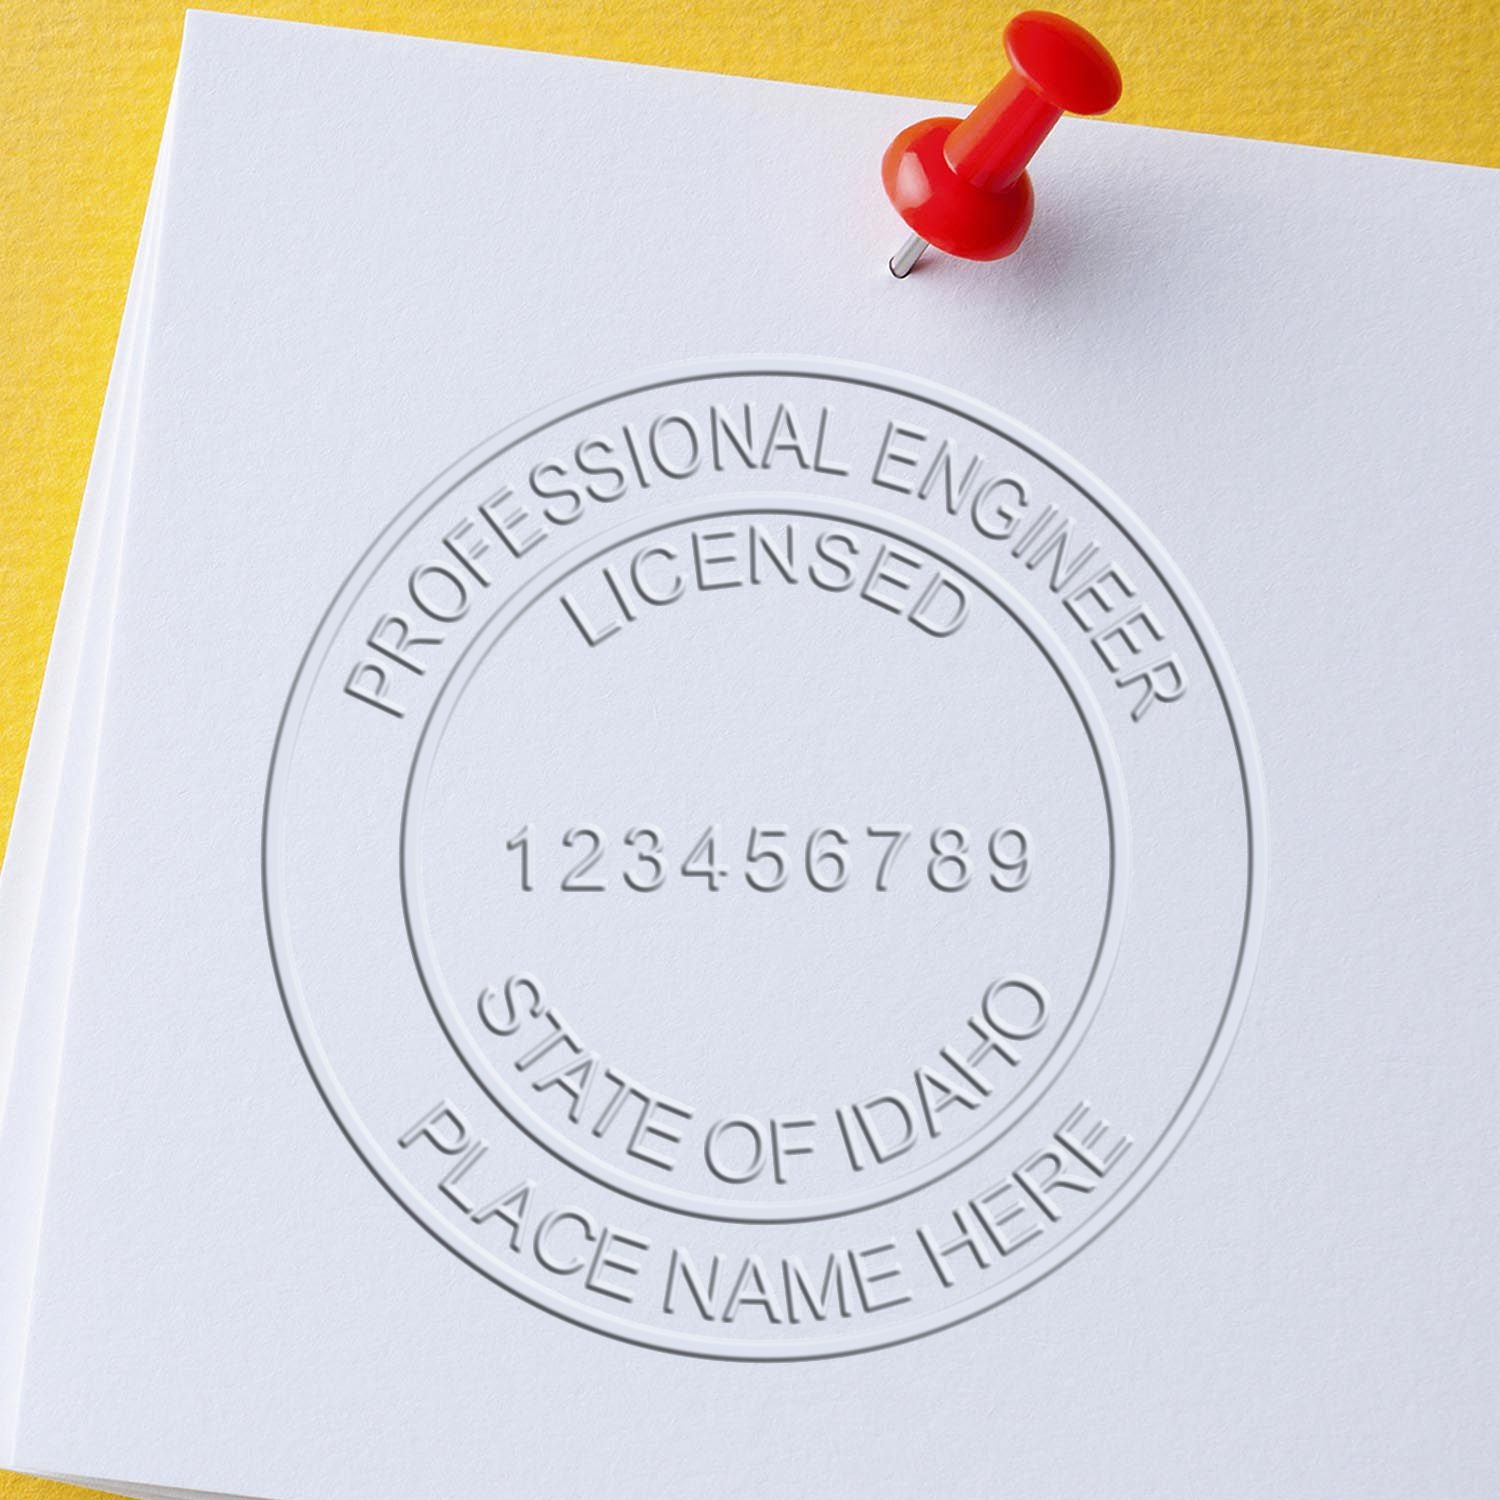 A photograph of the Soft Idaho Professional Engineer Seal stamp impression reveals a vivid, professional image of the on paper.